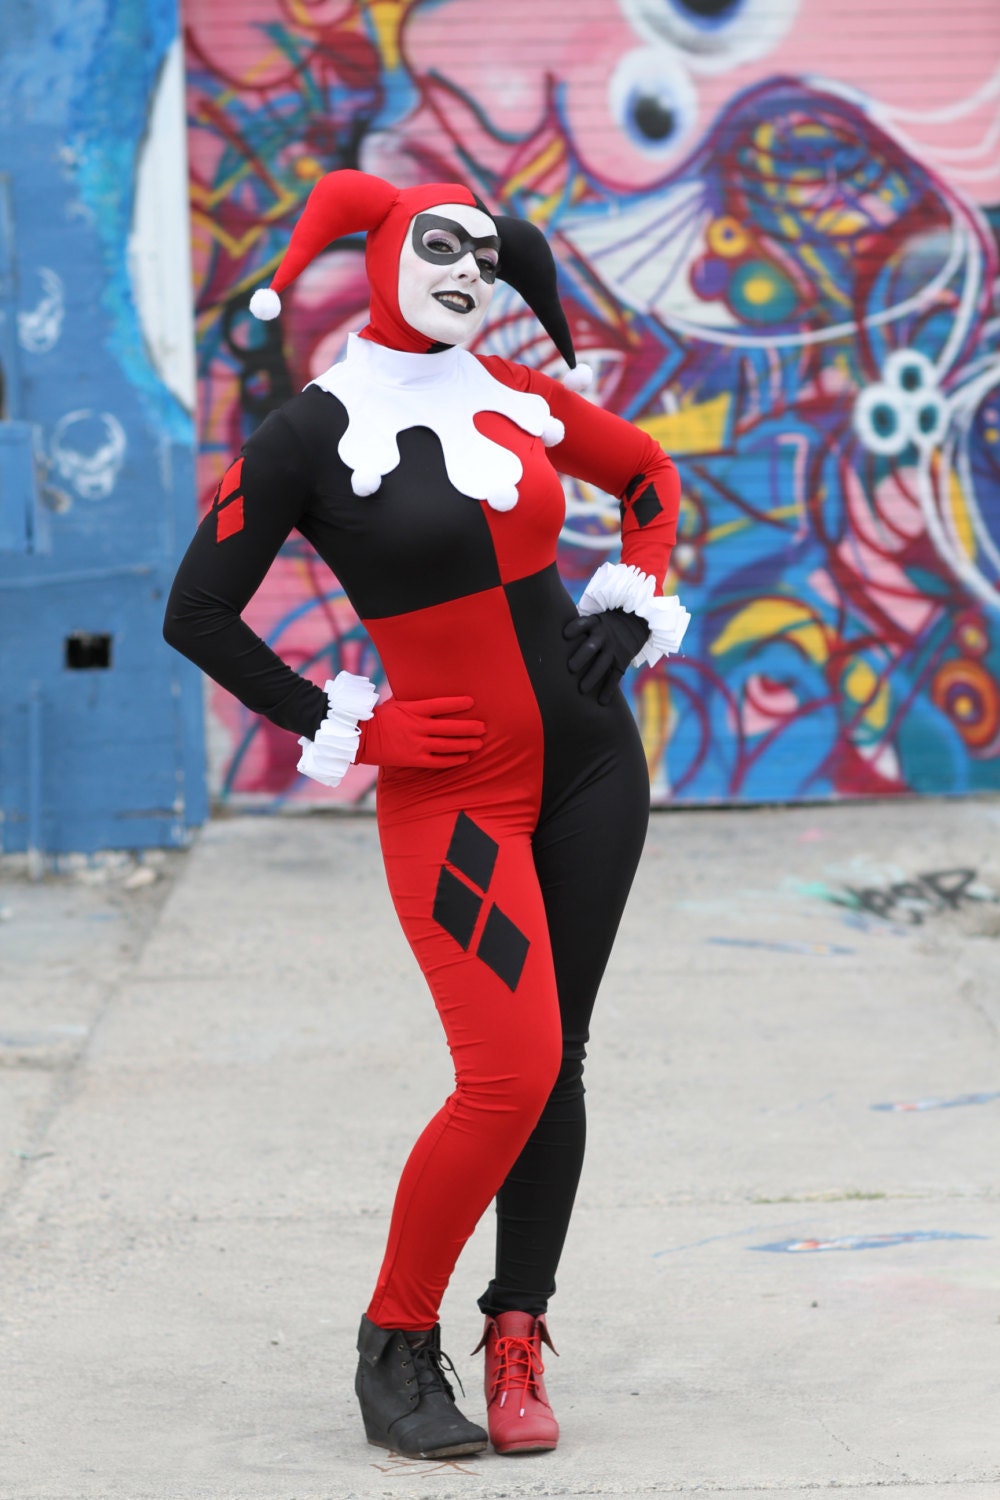 Classic Harley Quinn Costume Replica By Siqclothing On Etsy